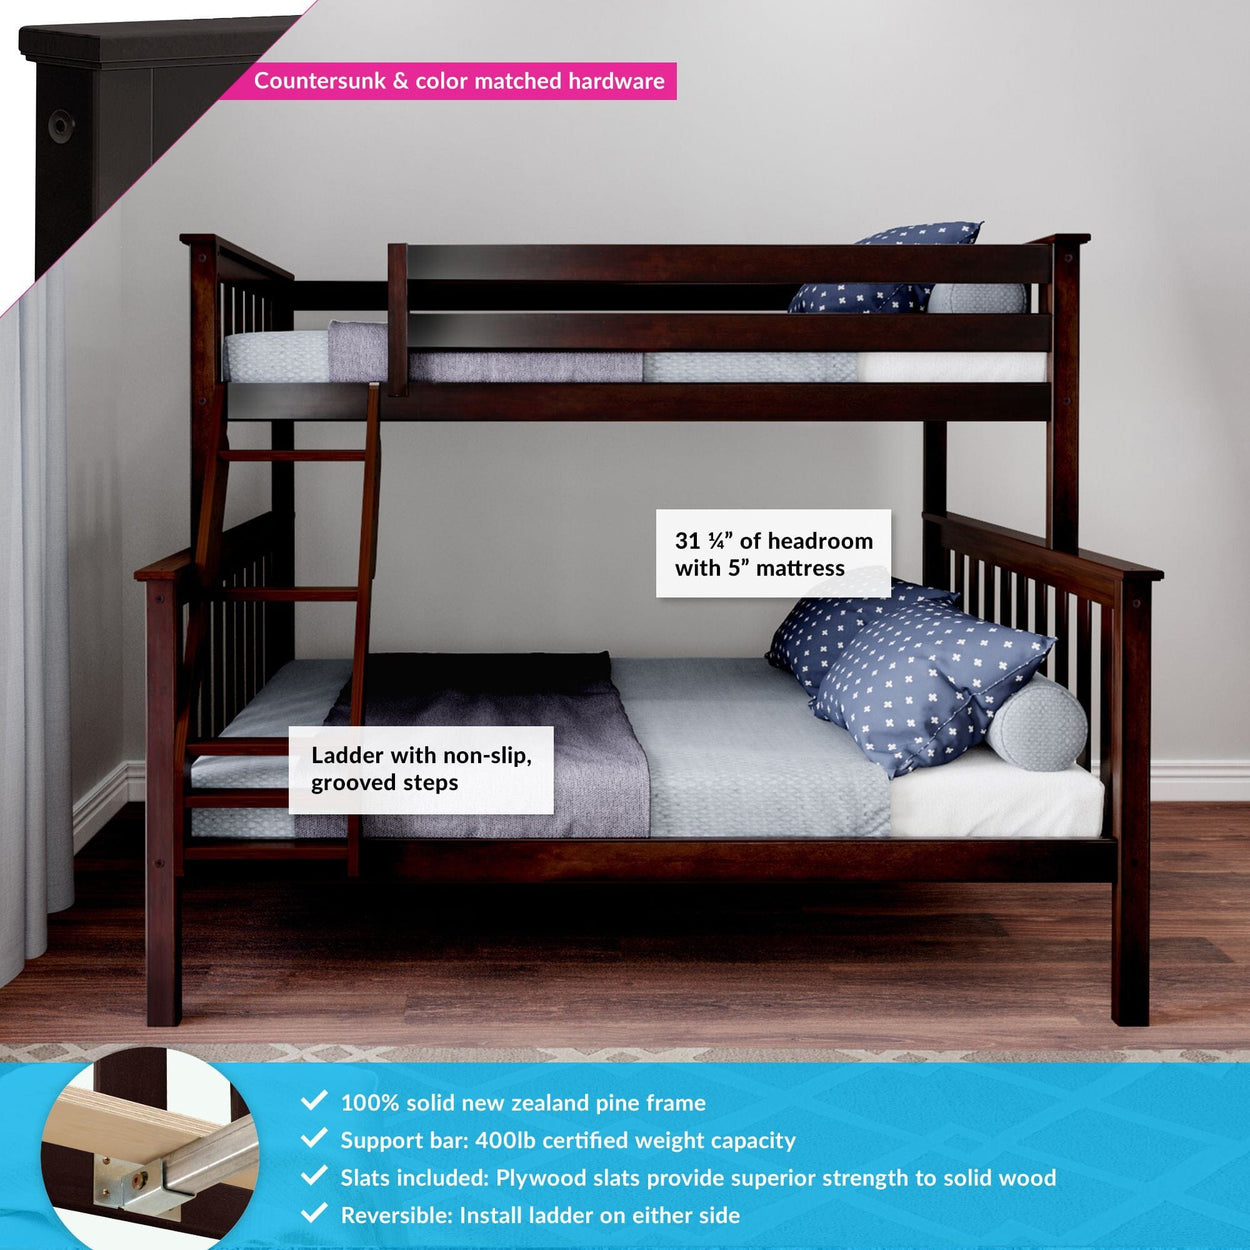 180231-005 : Bunk Beds Classic Twin over Full Bunk Bed, Espresso